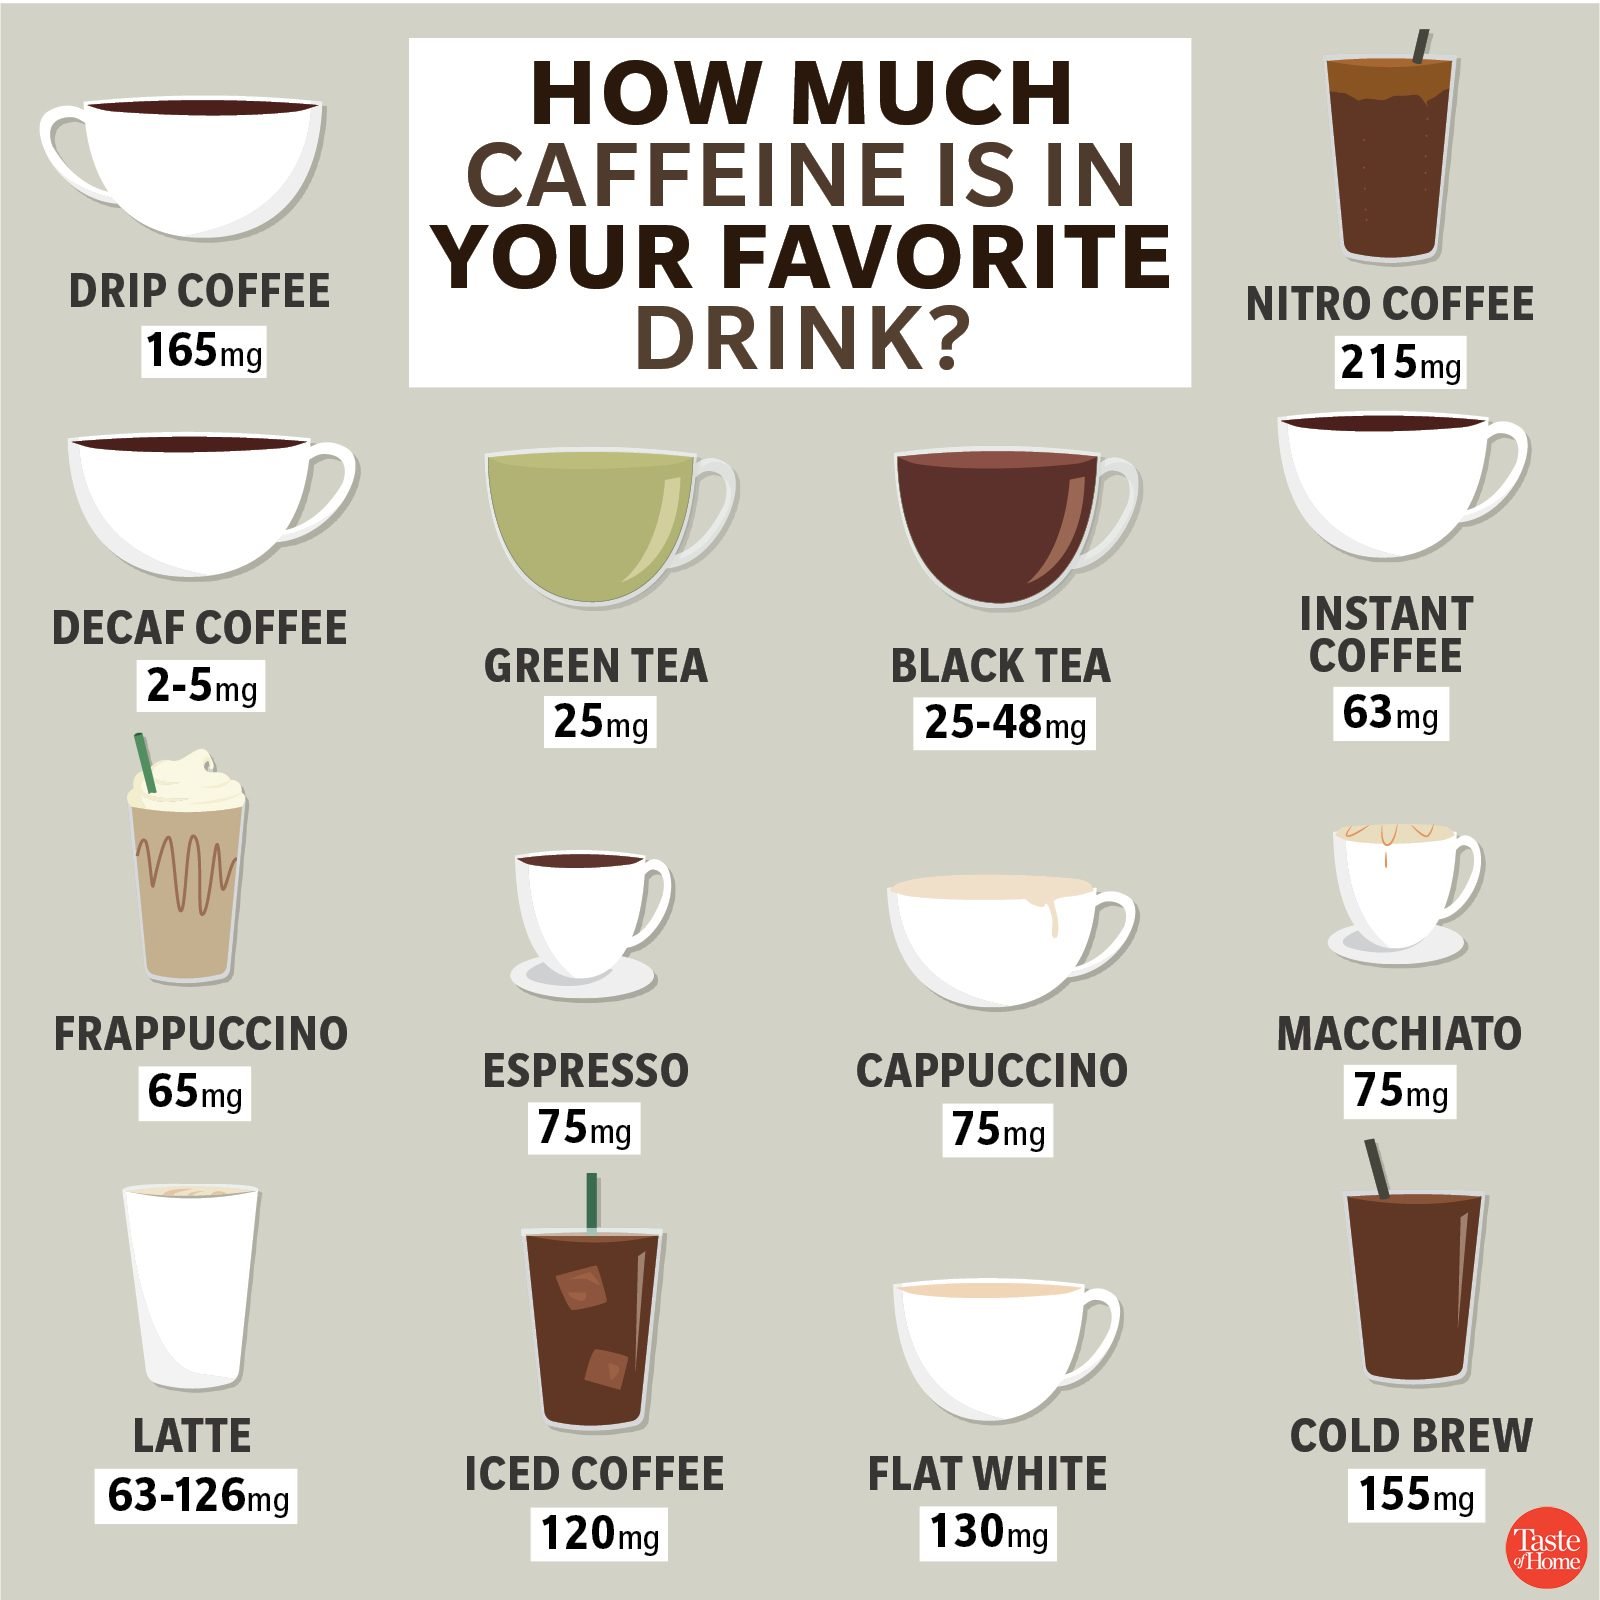 Easy Guide: Which Starbucks Coffee Has the Most Caffeine